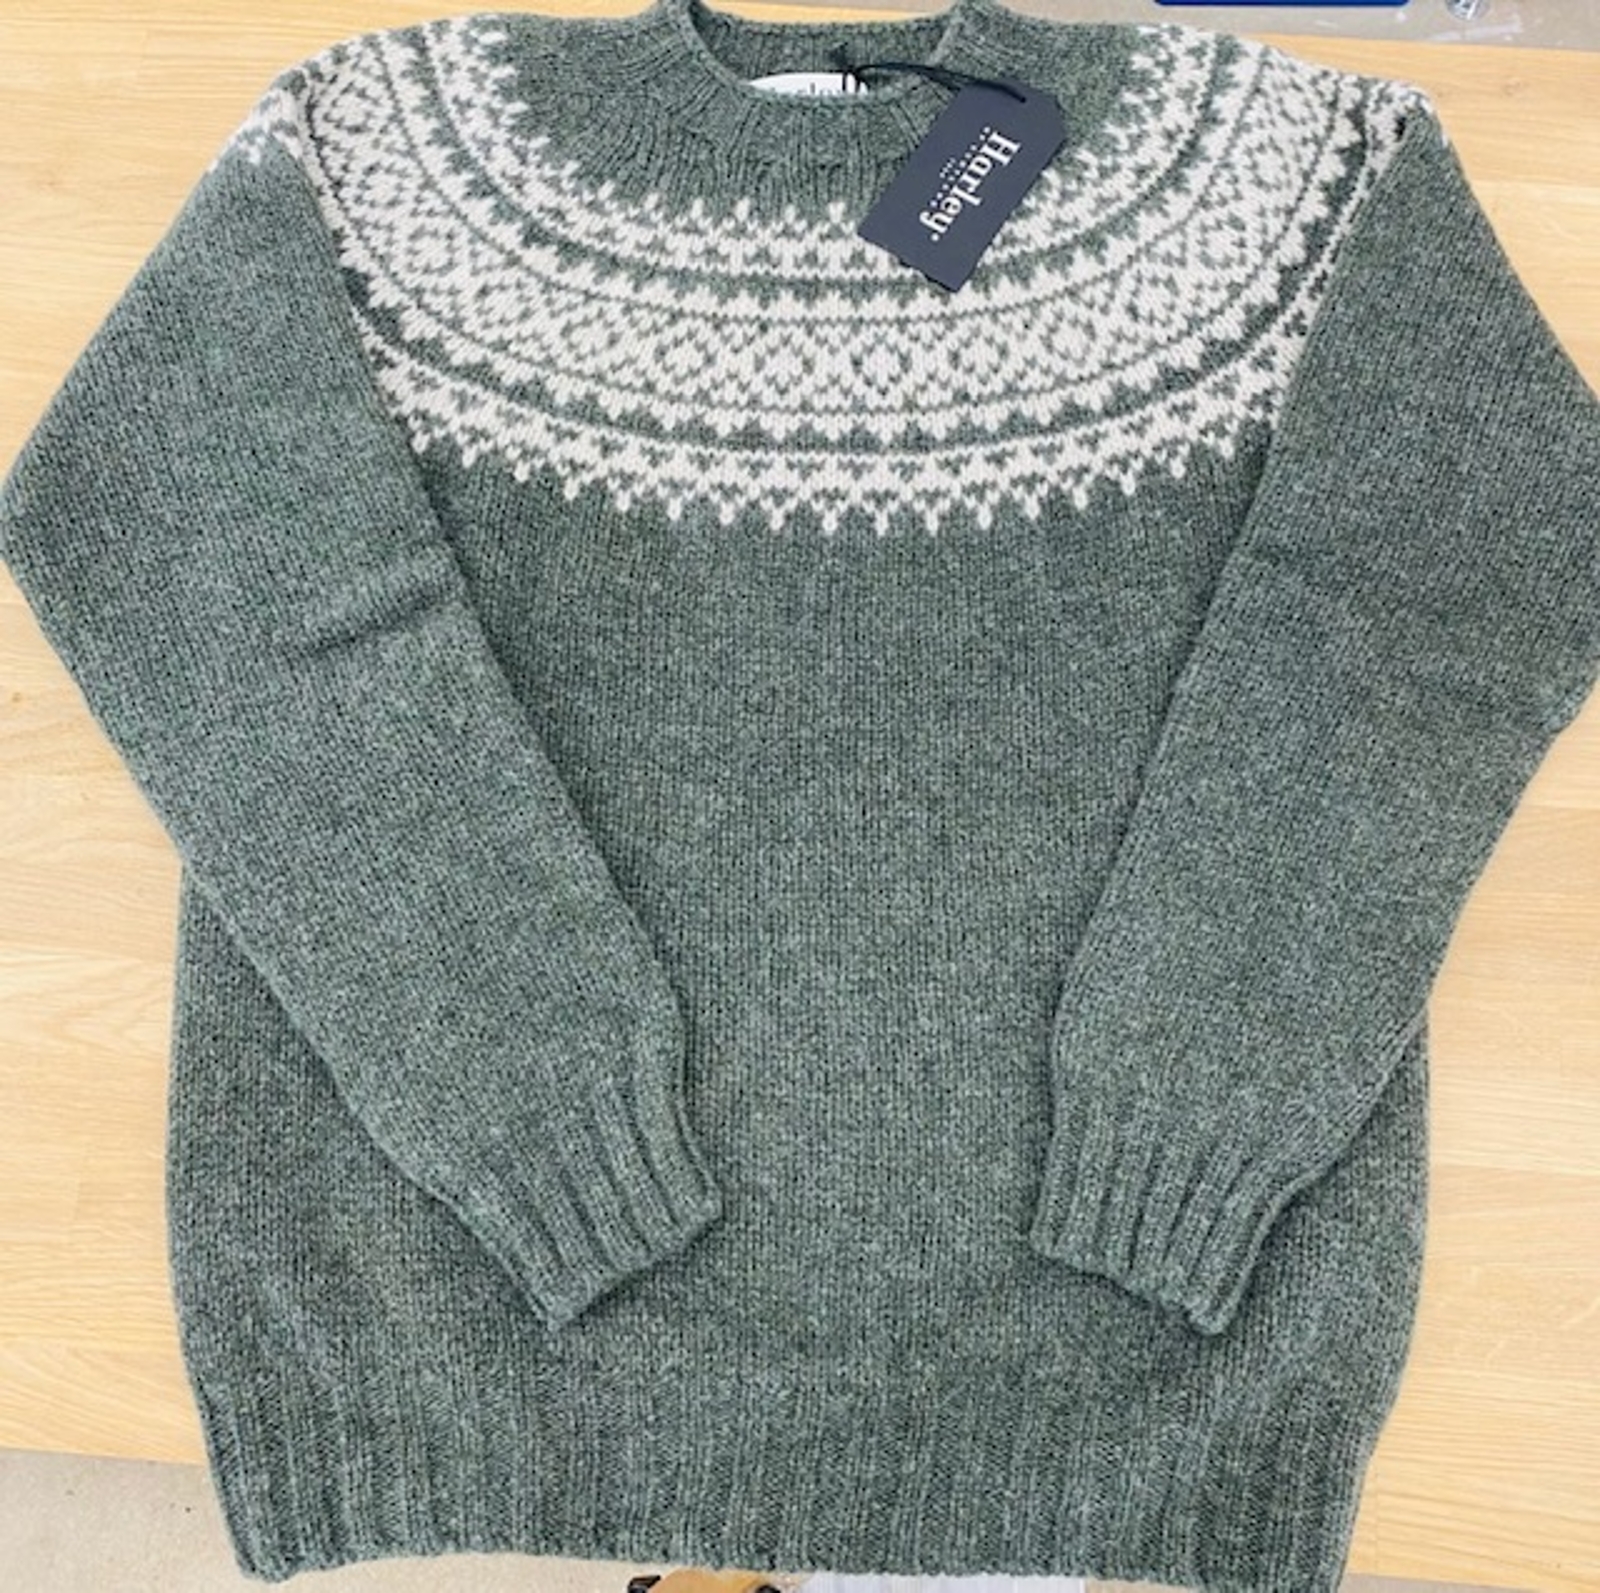 Harley of Scotland Fairisle Sweater in Spruce/Putty - £129.00 - the Old ...